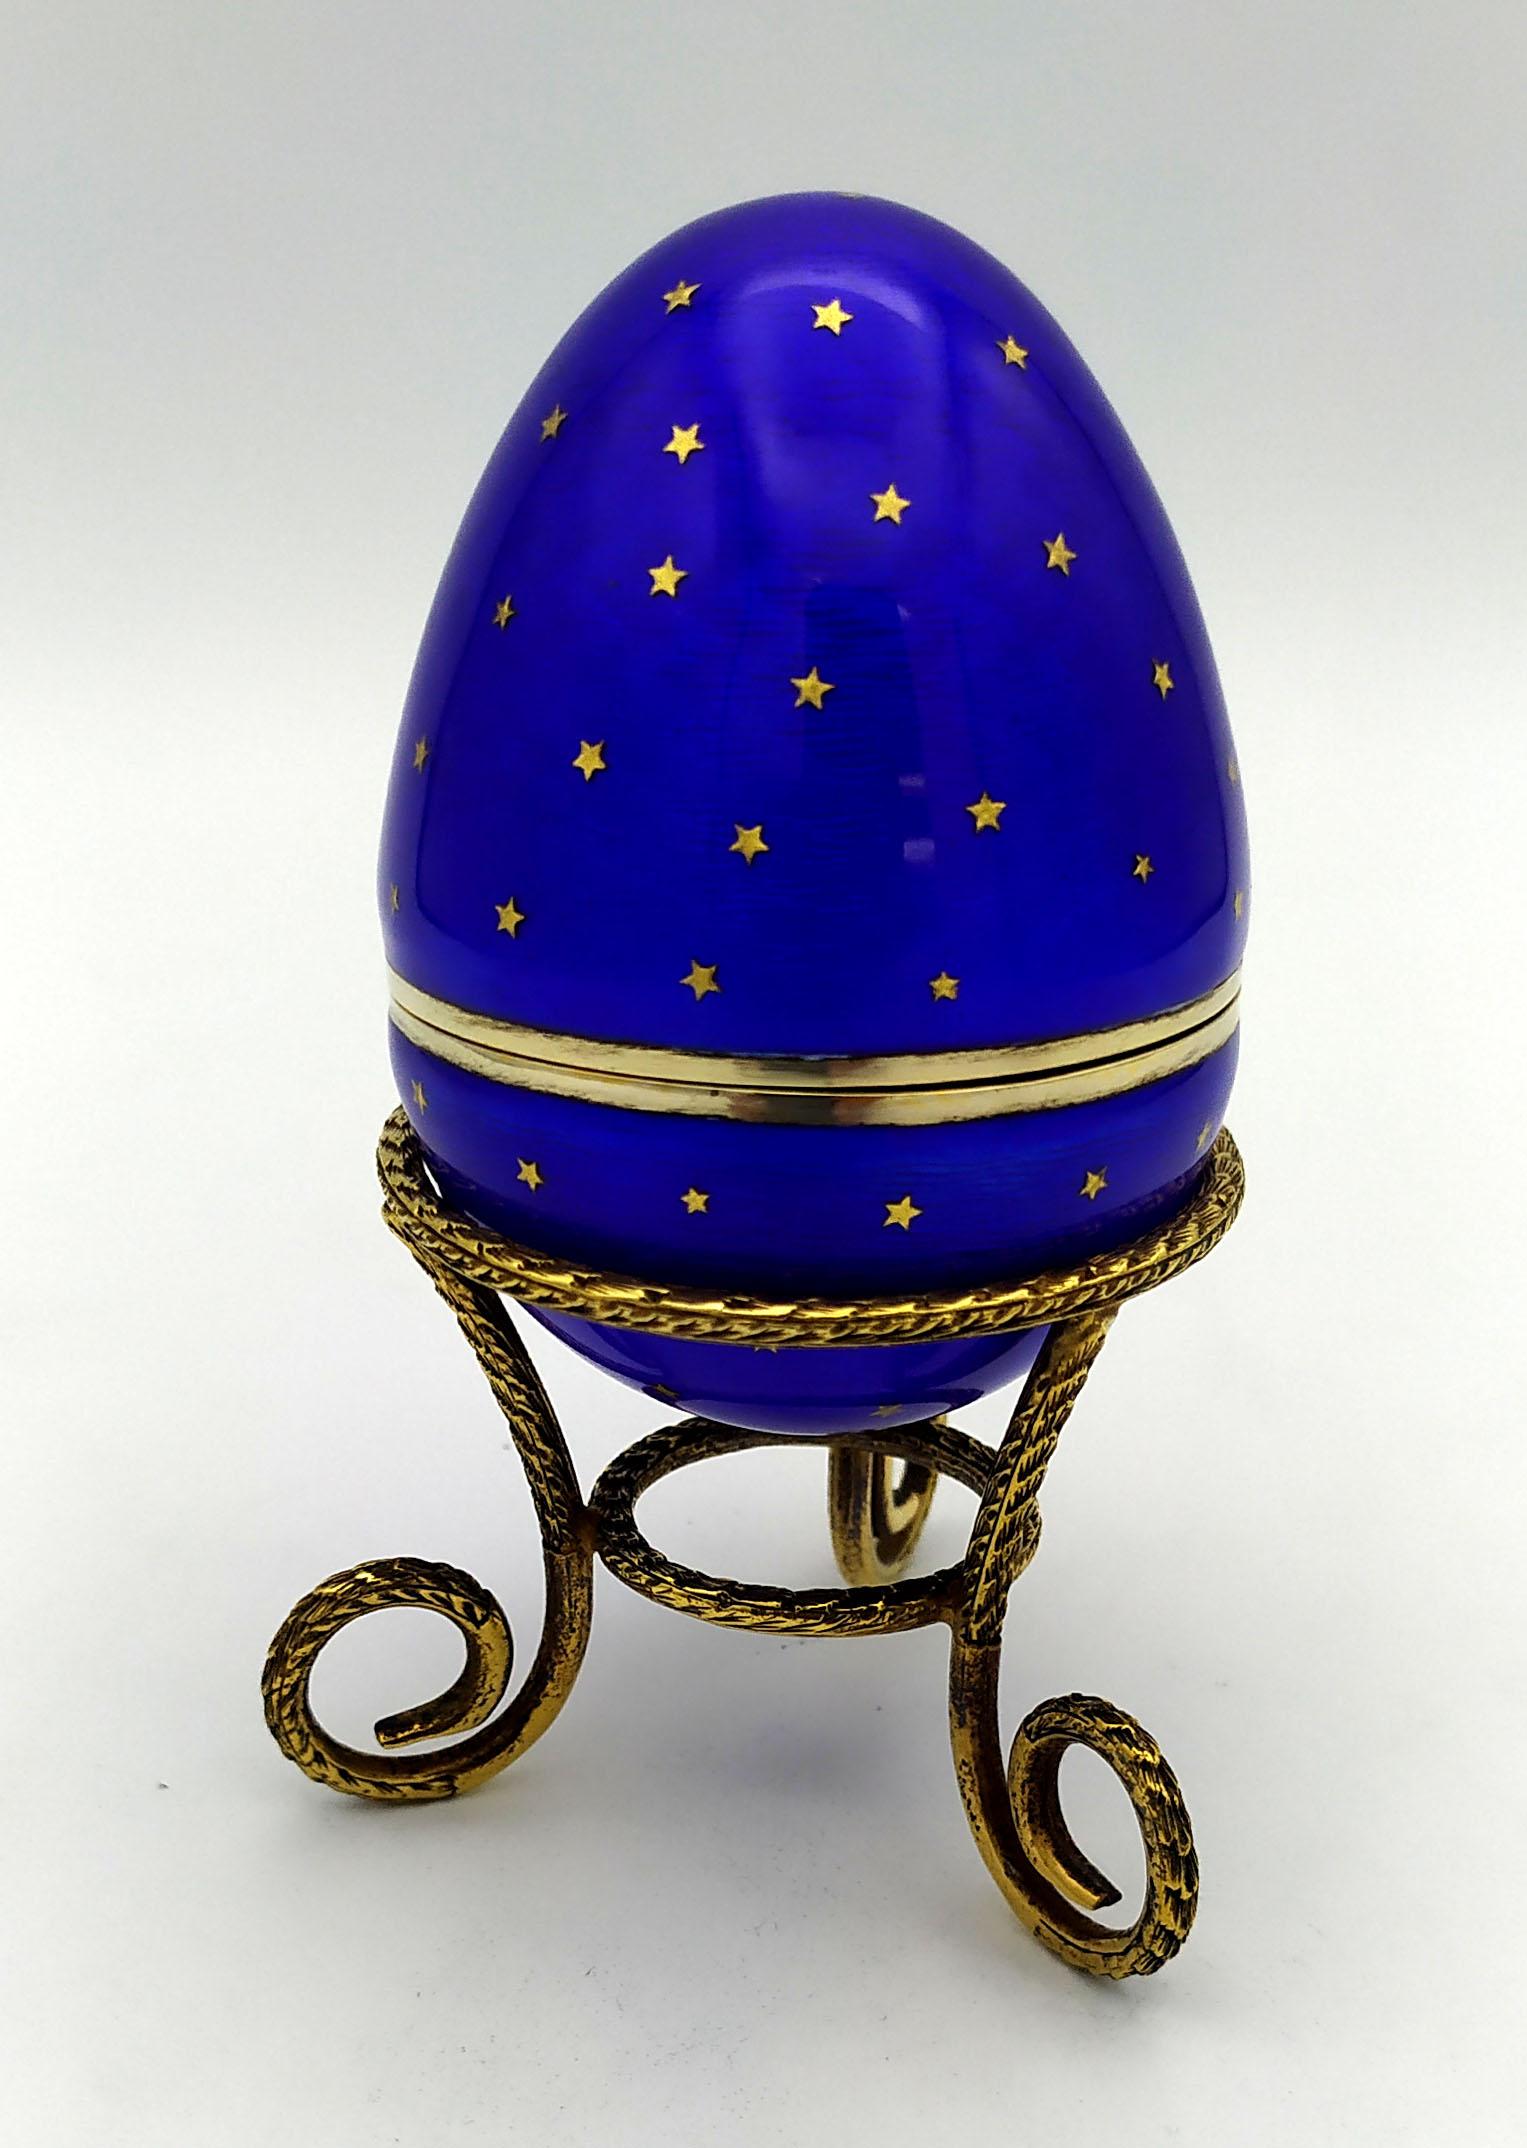 Egg with tripod in 925/1000 sterling silver gold plated with translucent blue fired enamel on guillochè and with the insertion of pure gold “paillons” in the shape of stars to create a starry sky effect. Inspired by Fabergè's Russian eggs, but with